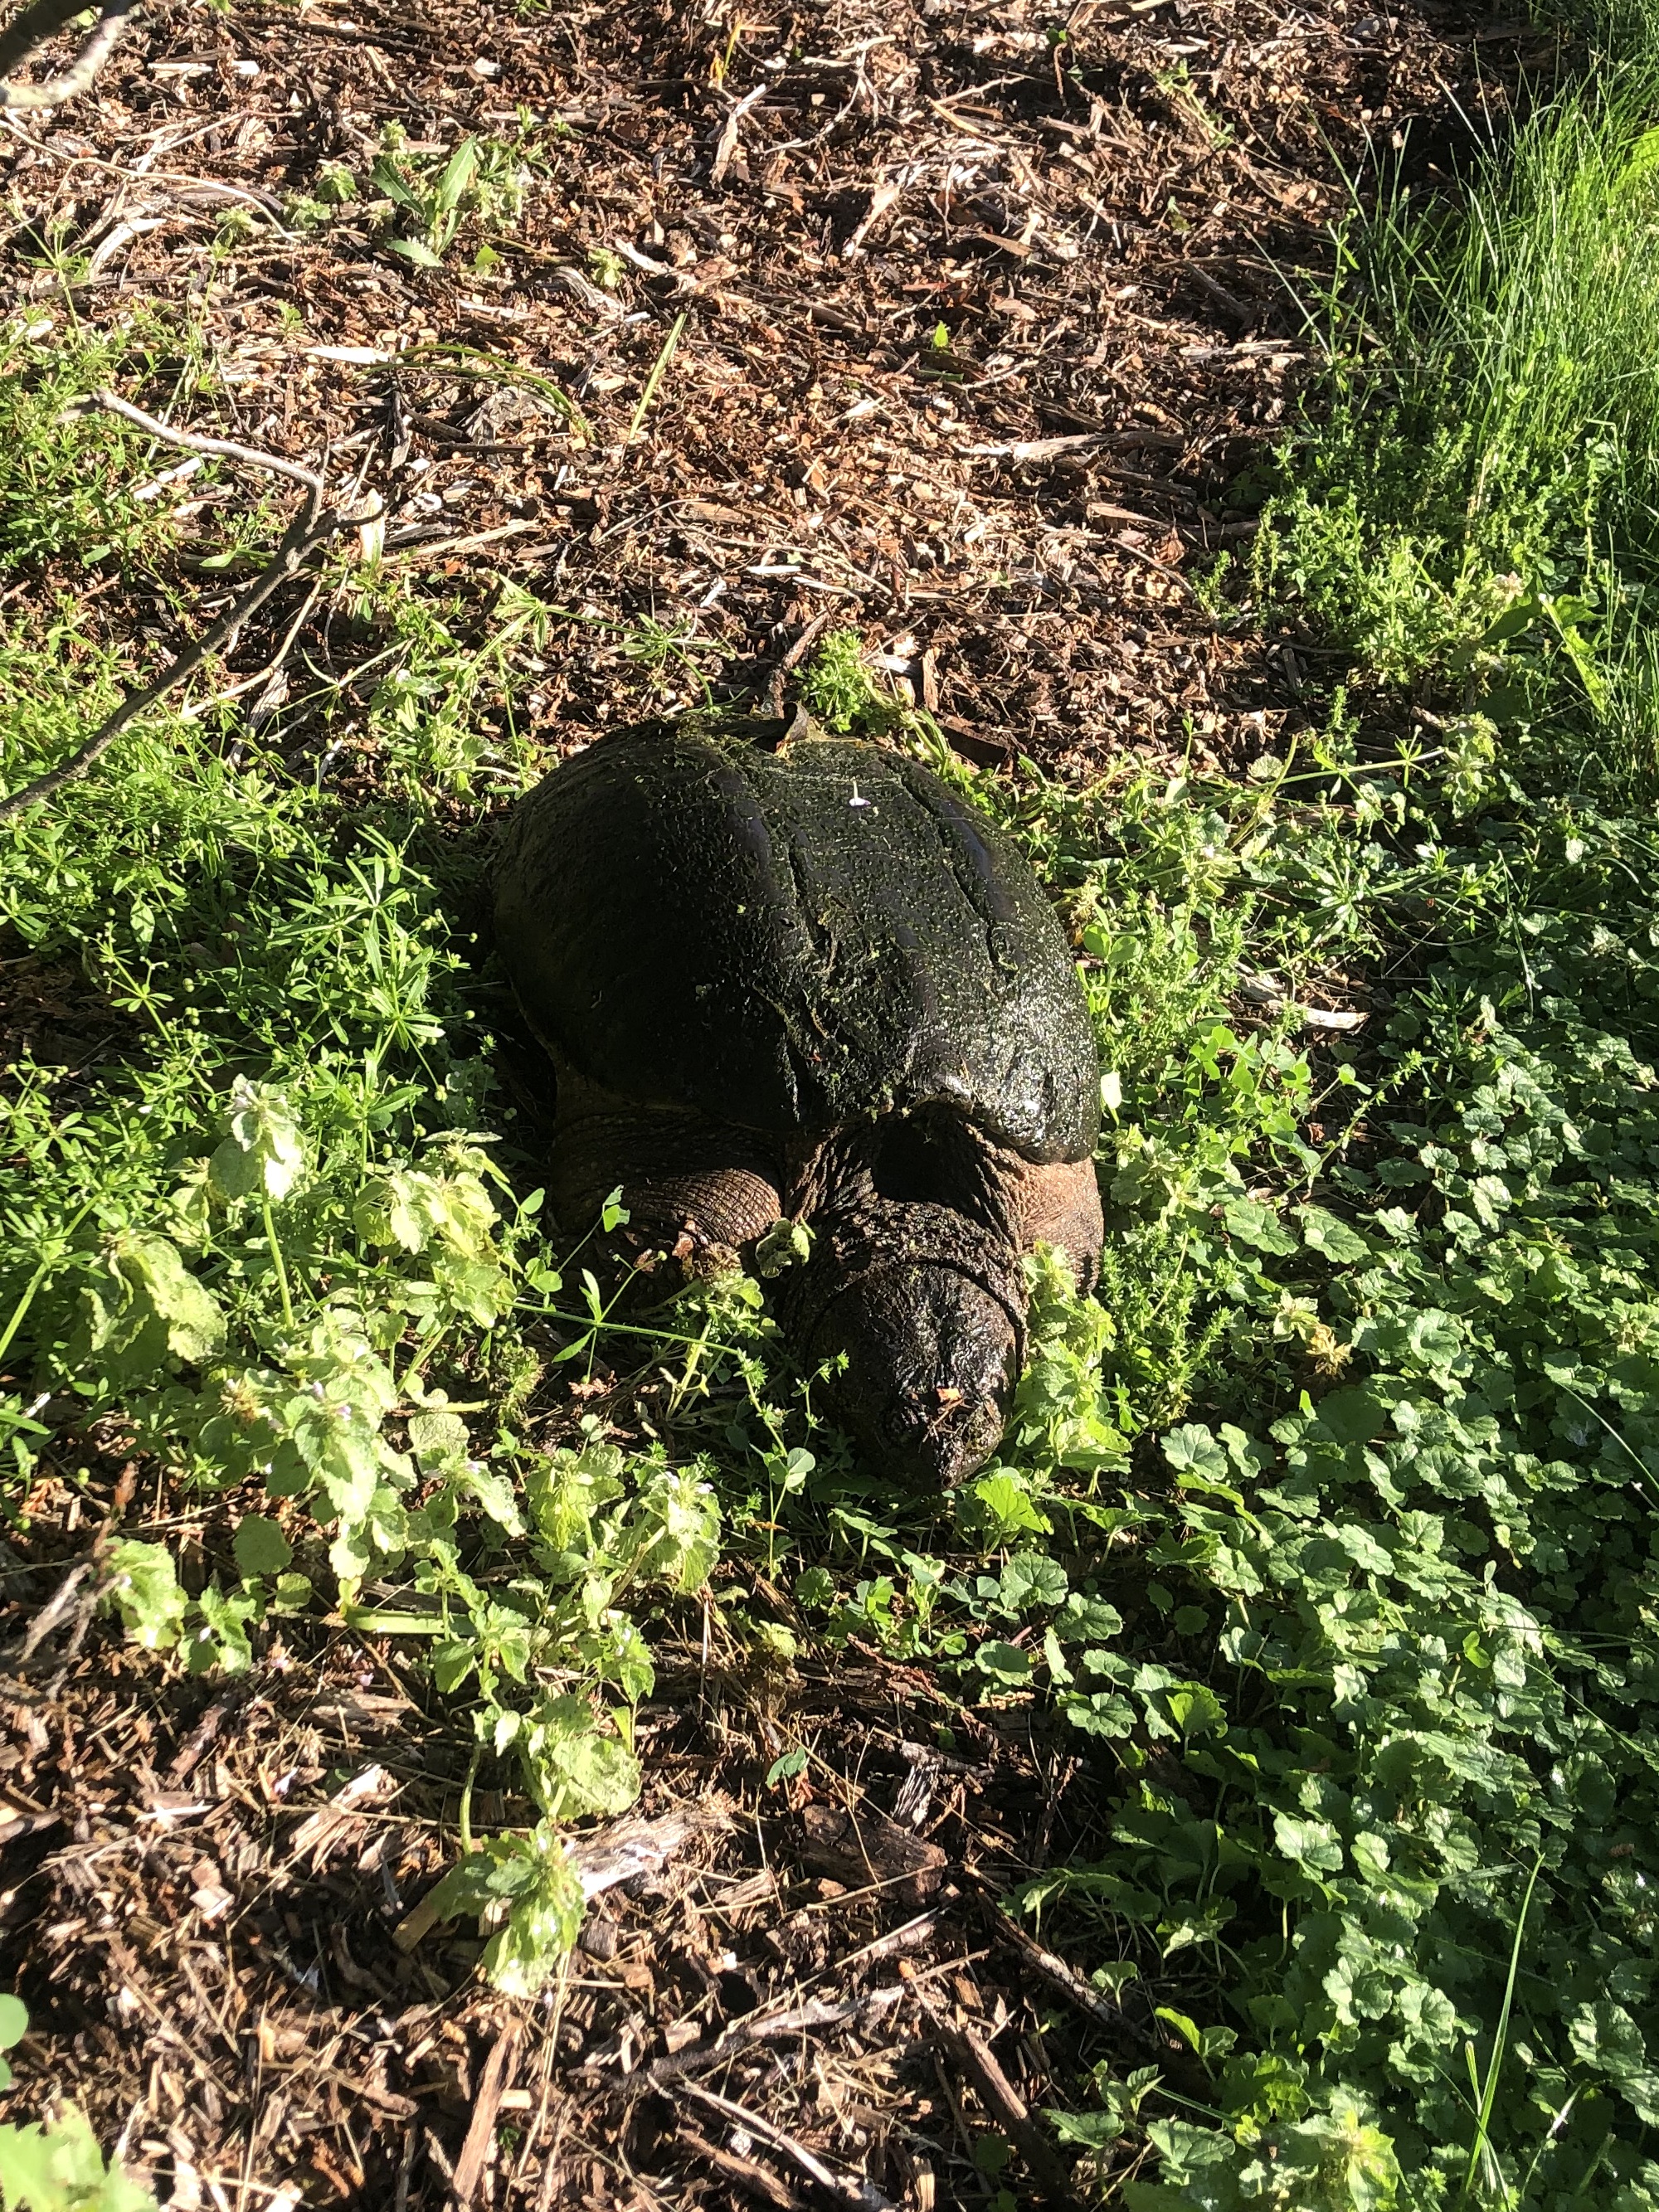 Snapping Turtle in E. Ray Stevens Pond and Aquatic Gardens on corner of Manitou Way and Nakoma Road in Madison, Wisconsin on June 14, 2022.